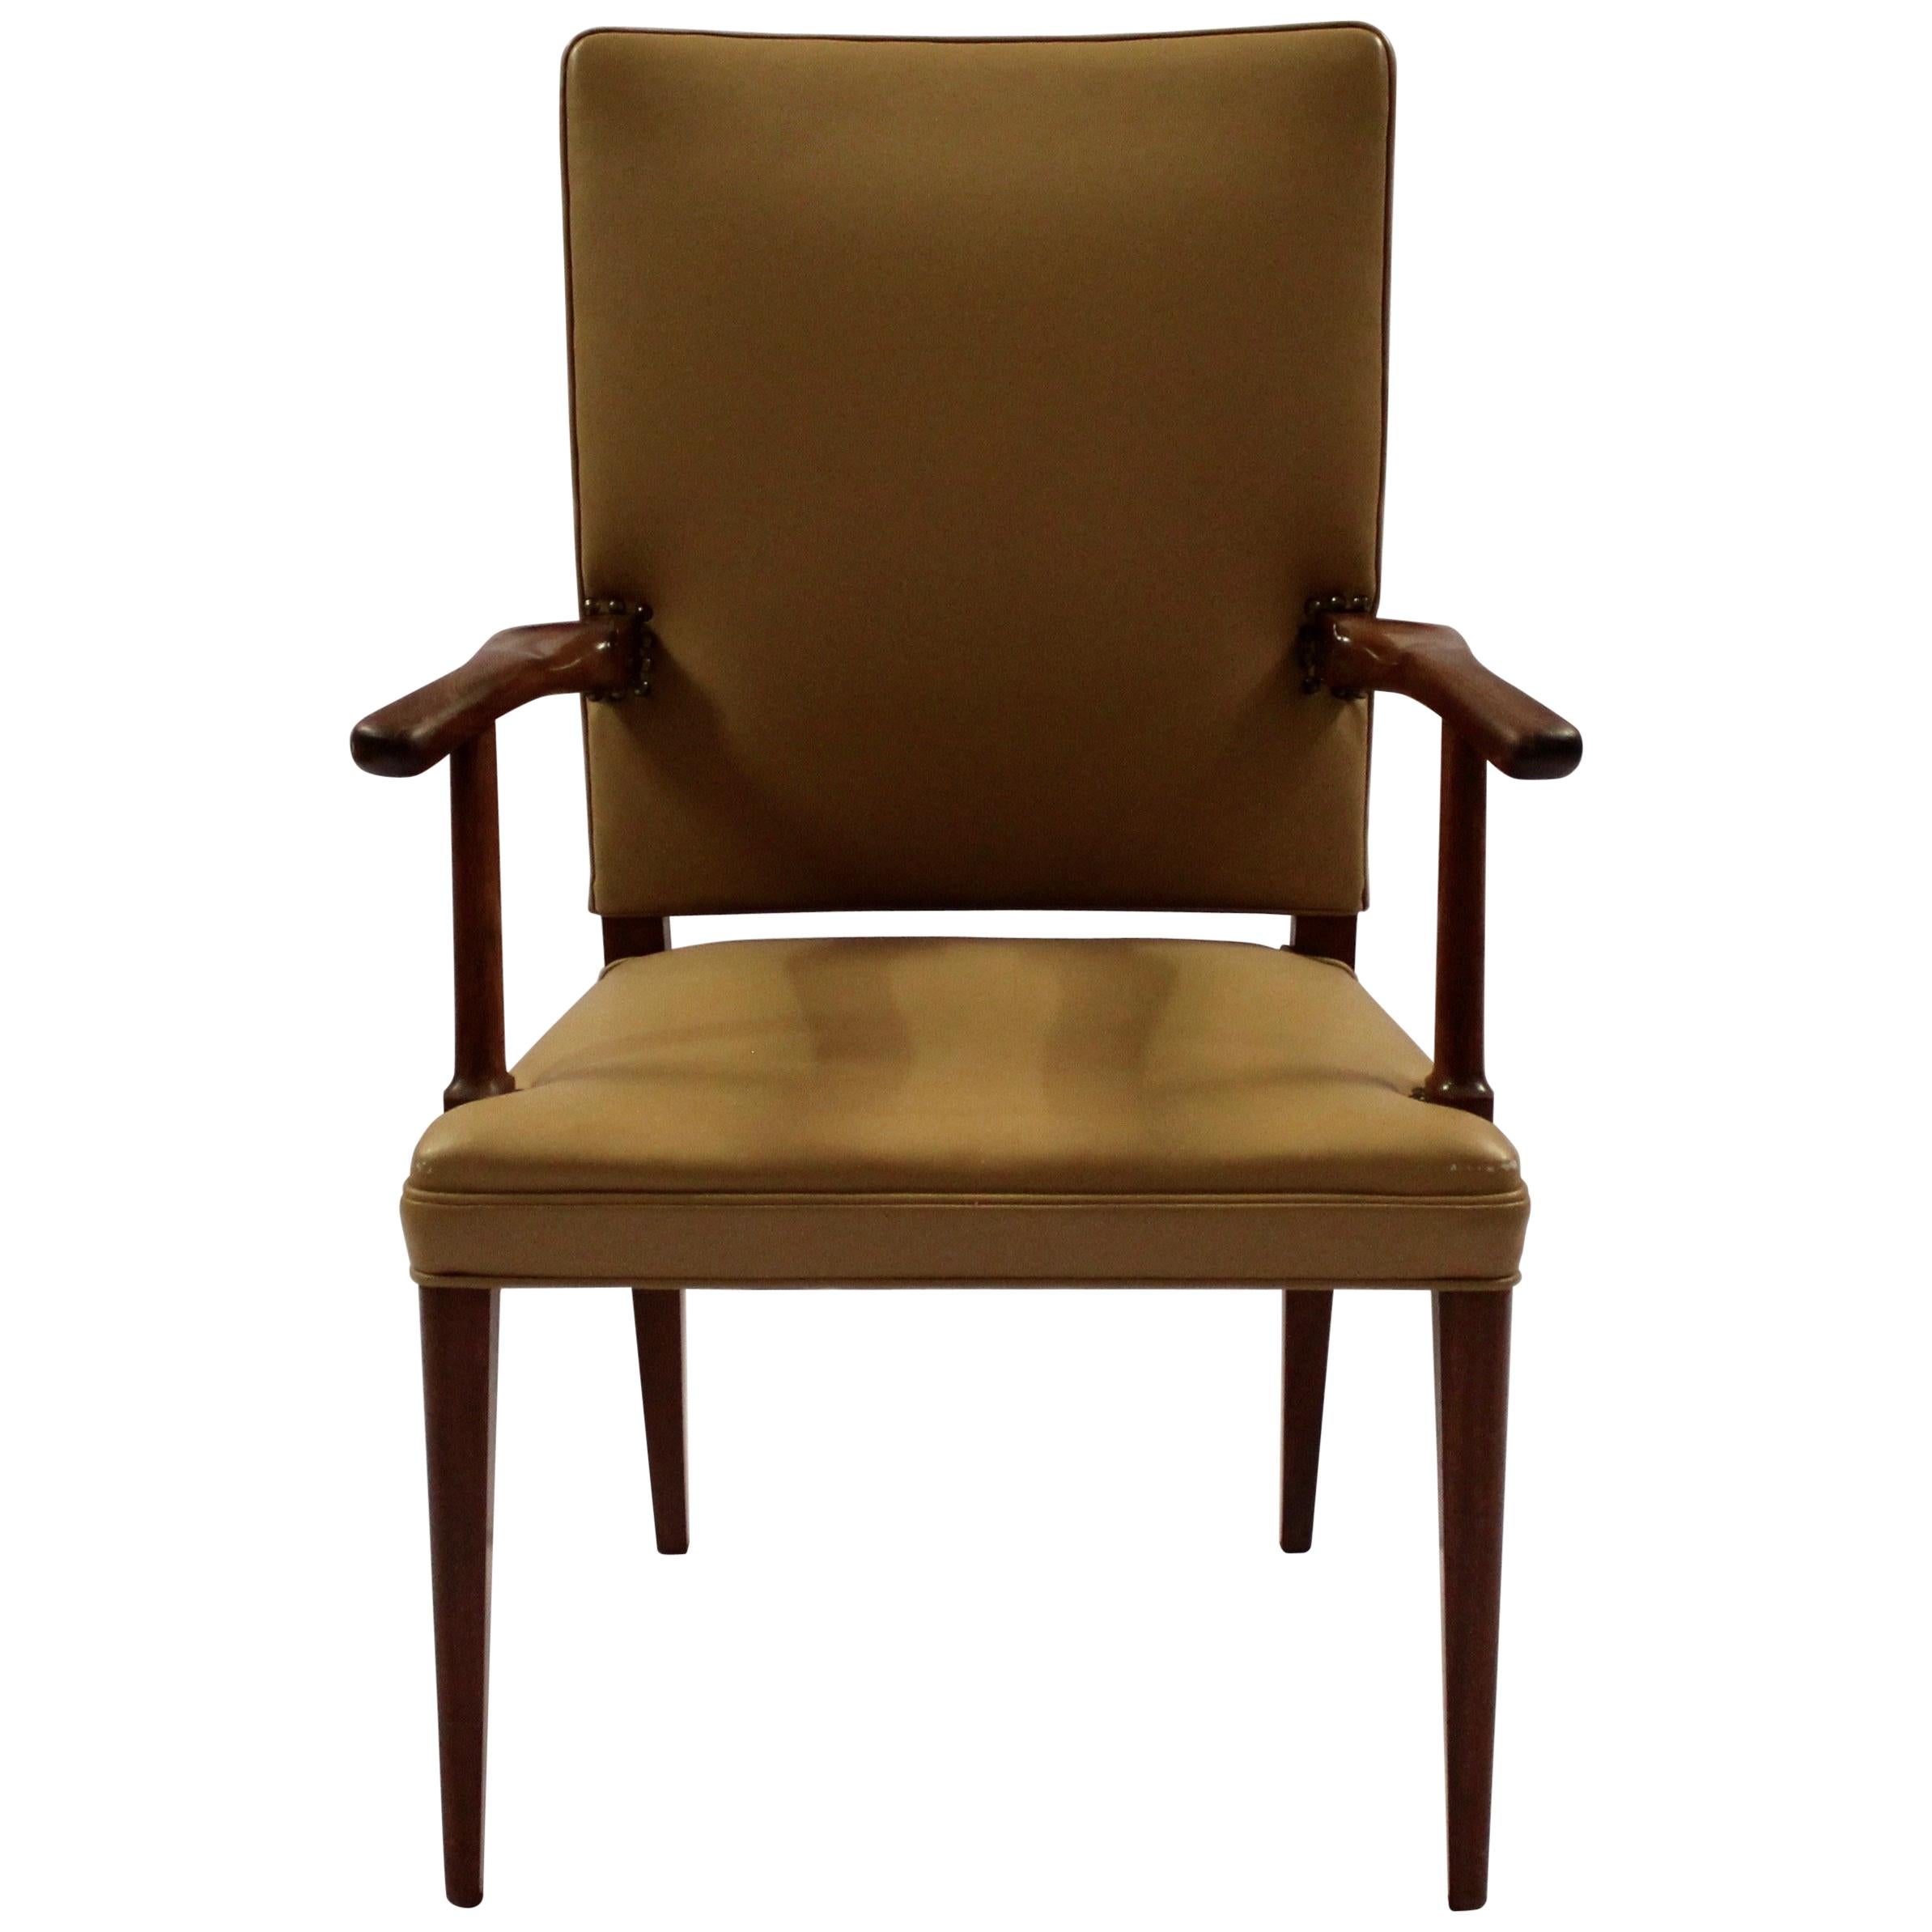 Armchair in Mahogany and Light Leather by Jacob Kjær from the 1950s